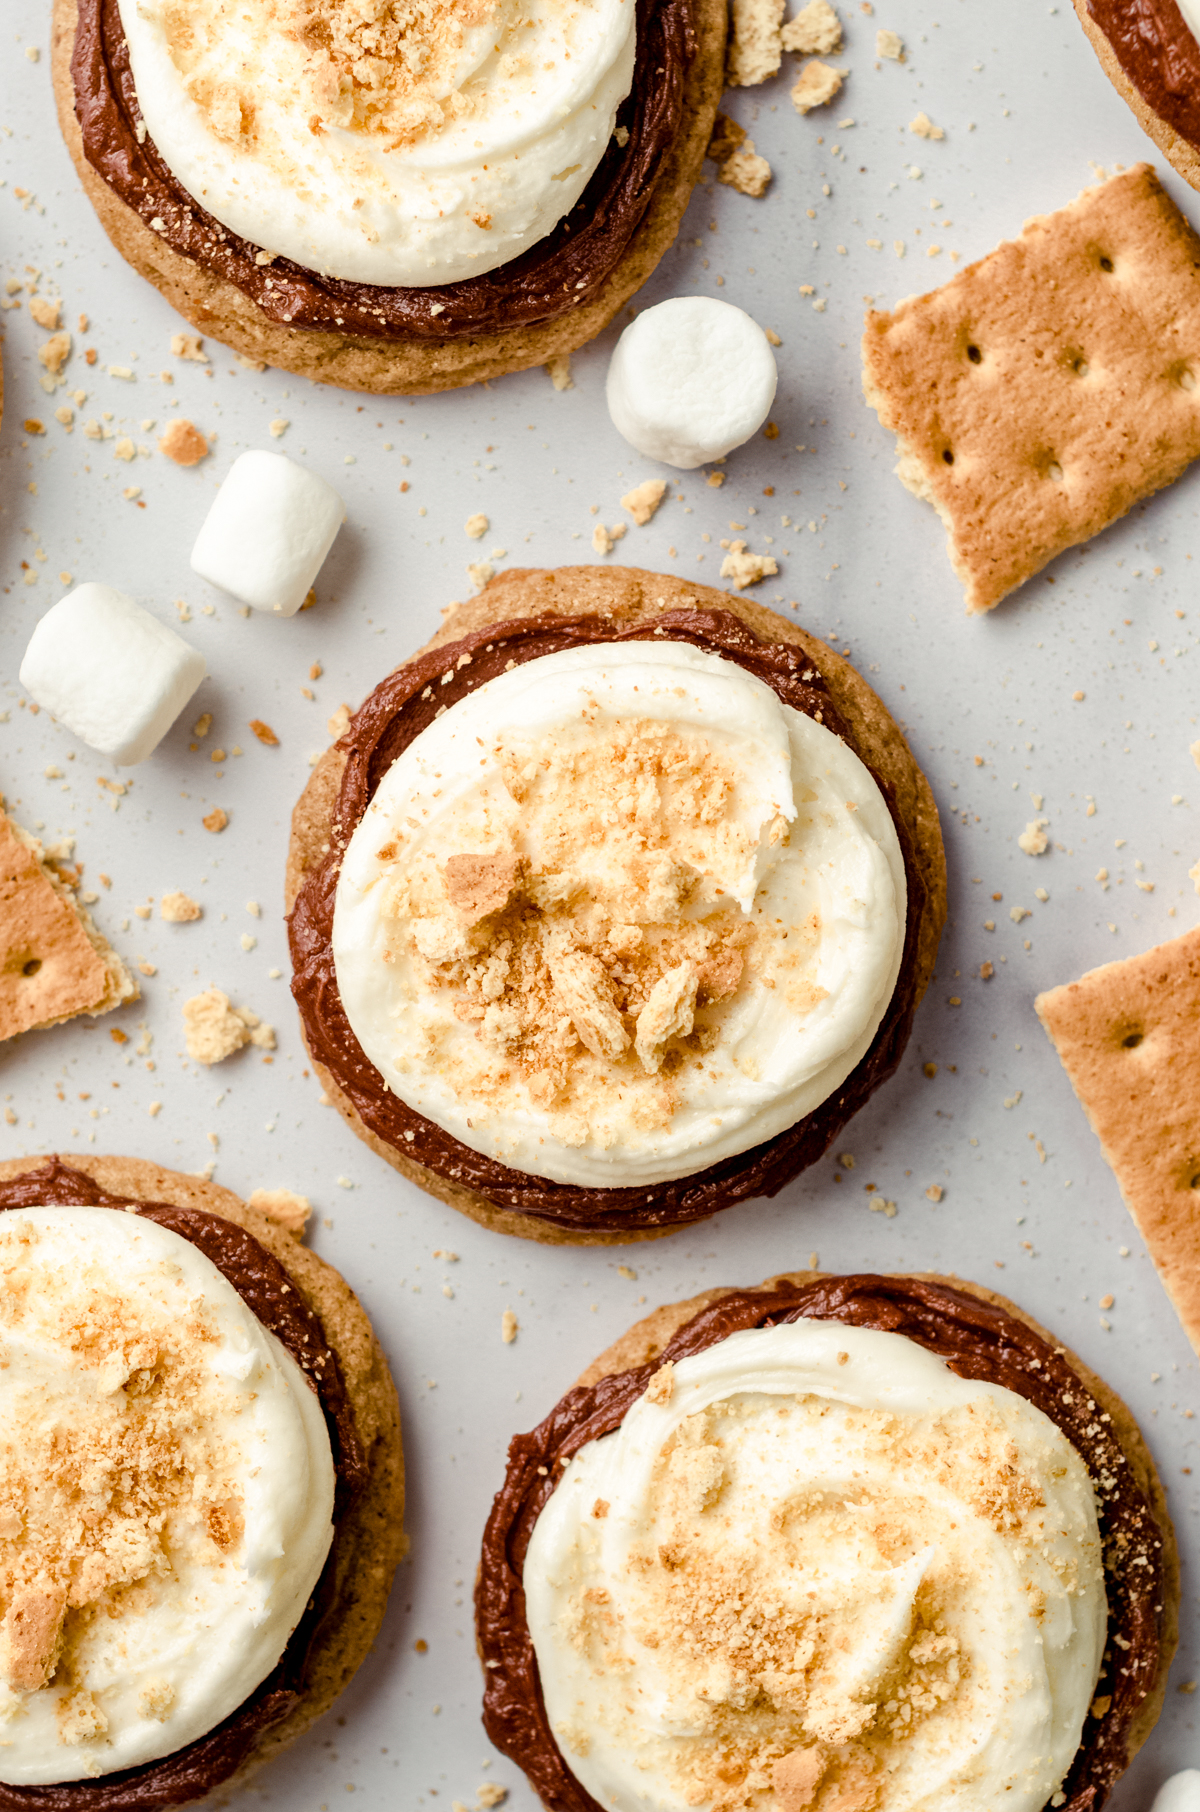 Aerial photo of frosted s'mores cookies on a surface with graham crackers and marshmallows scattered around.